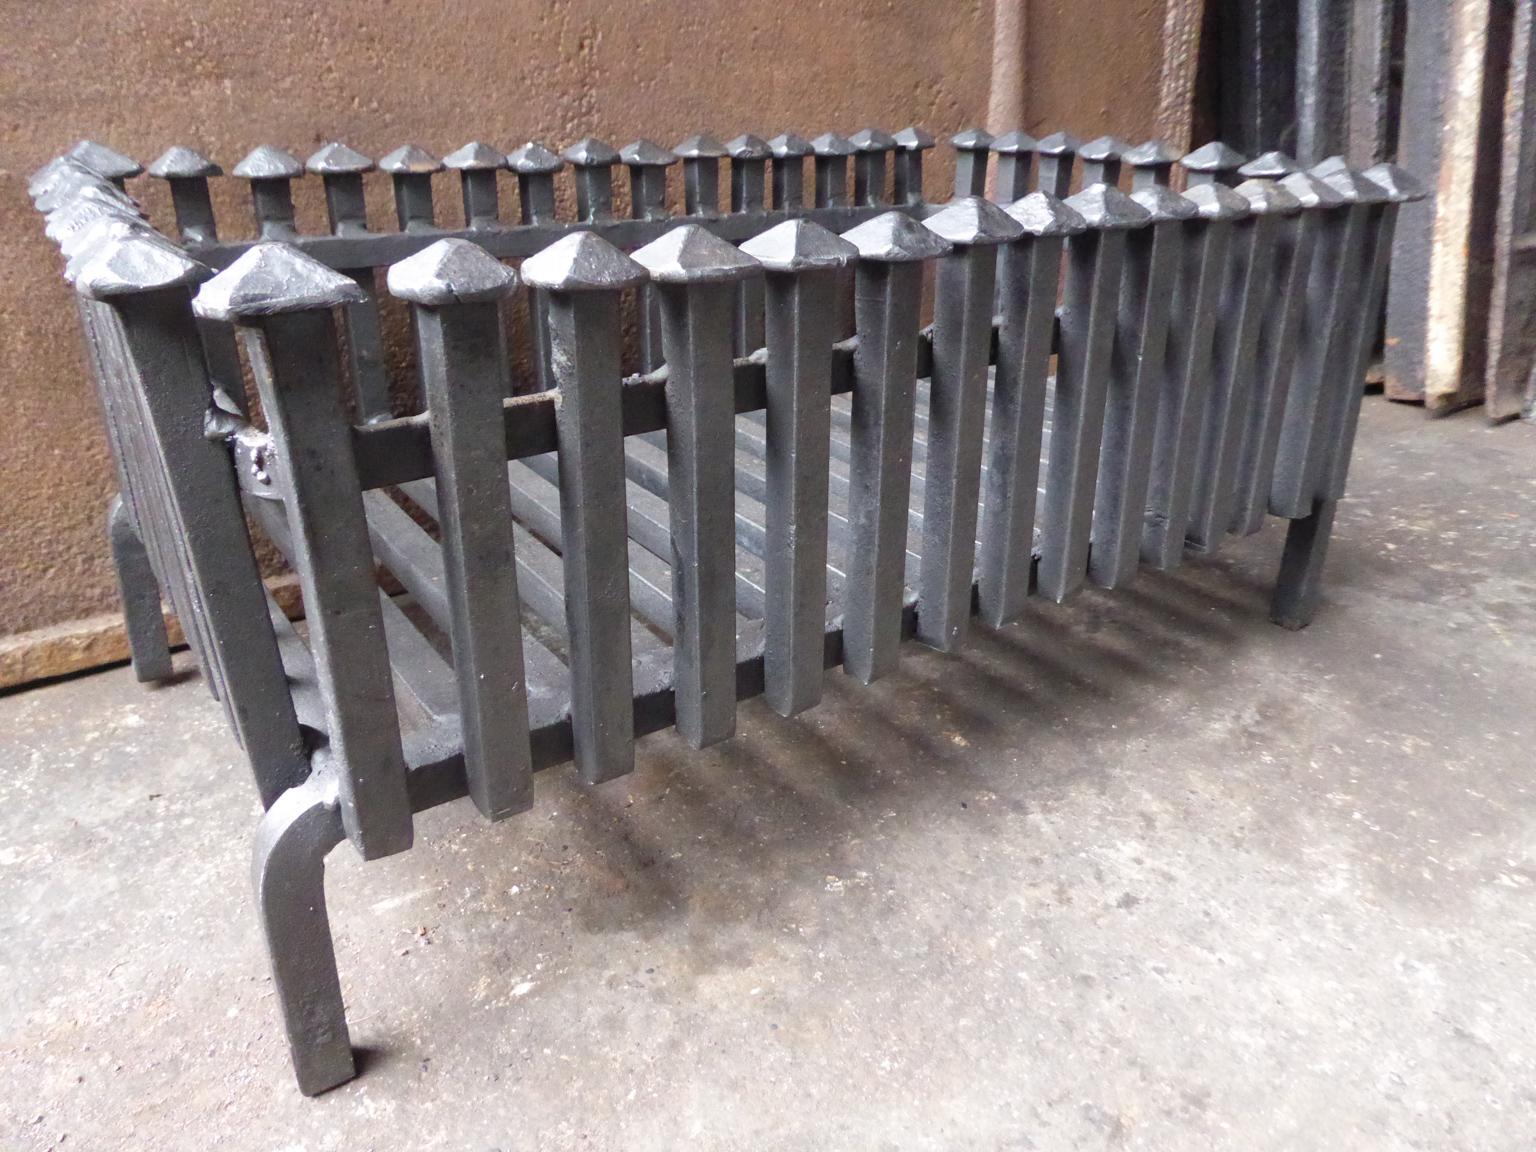 English Neo Gothic Style Fireplace Grate, Fire Grate 1